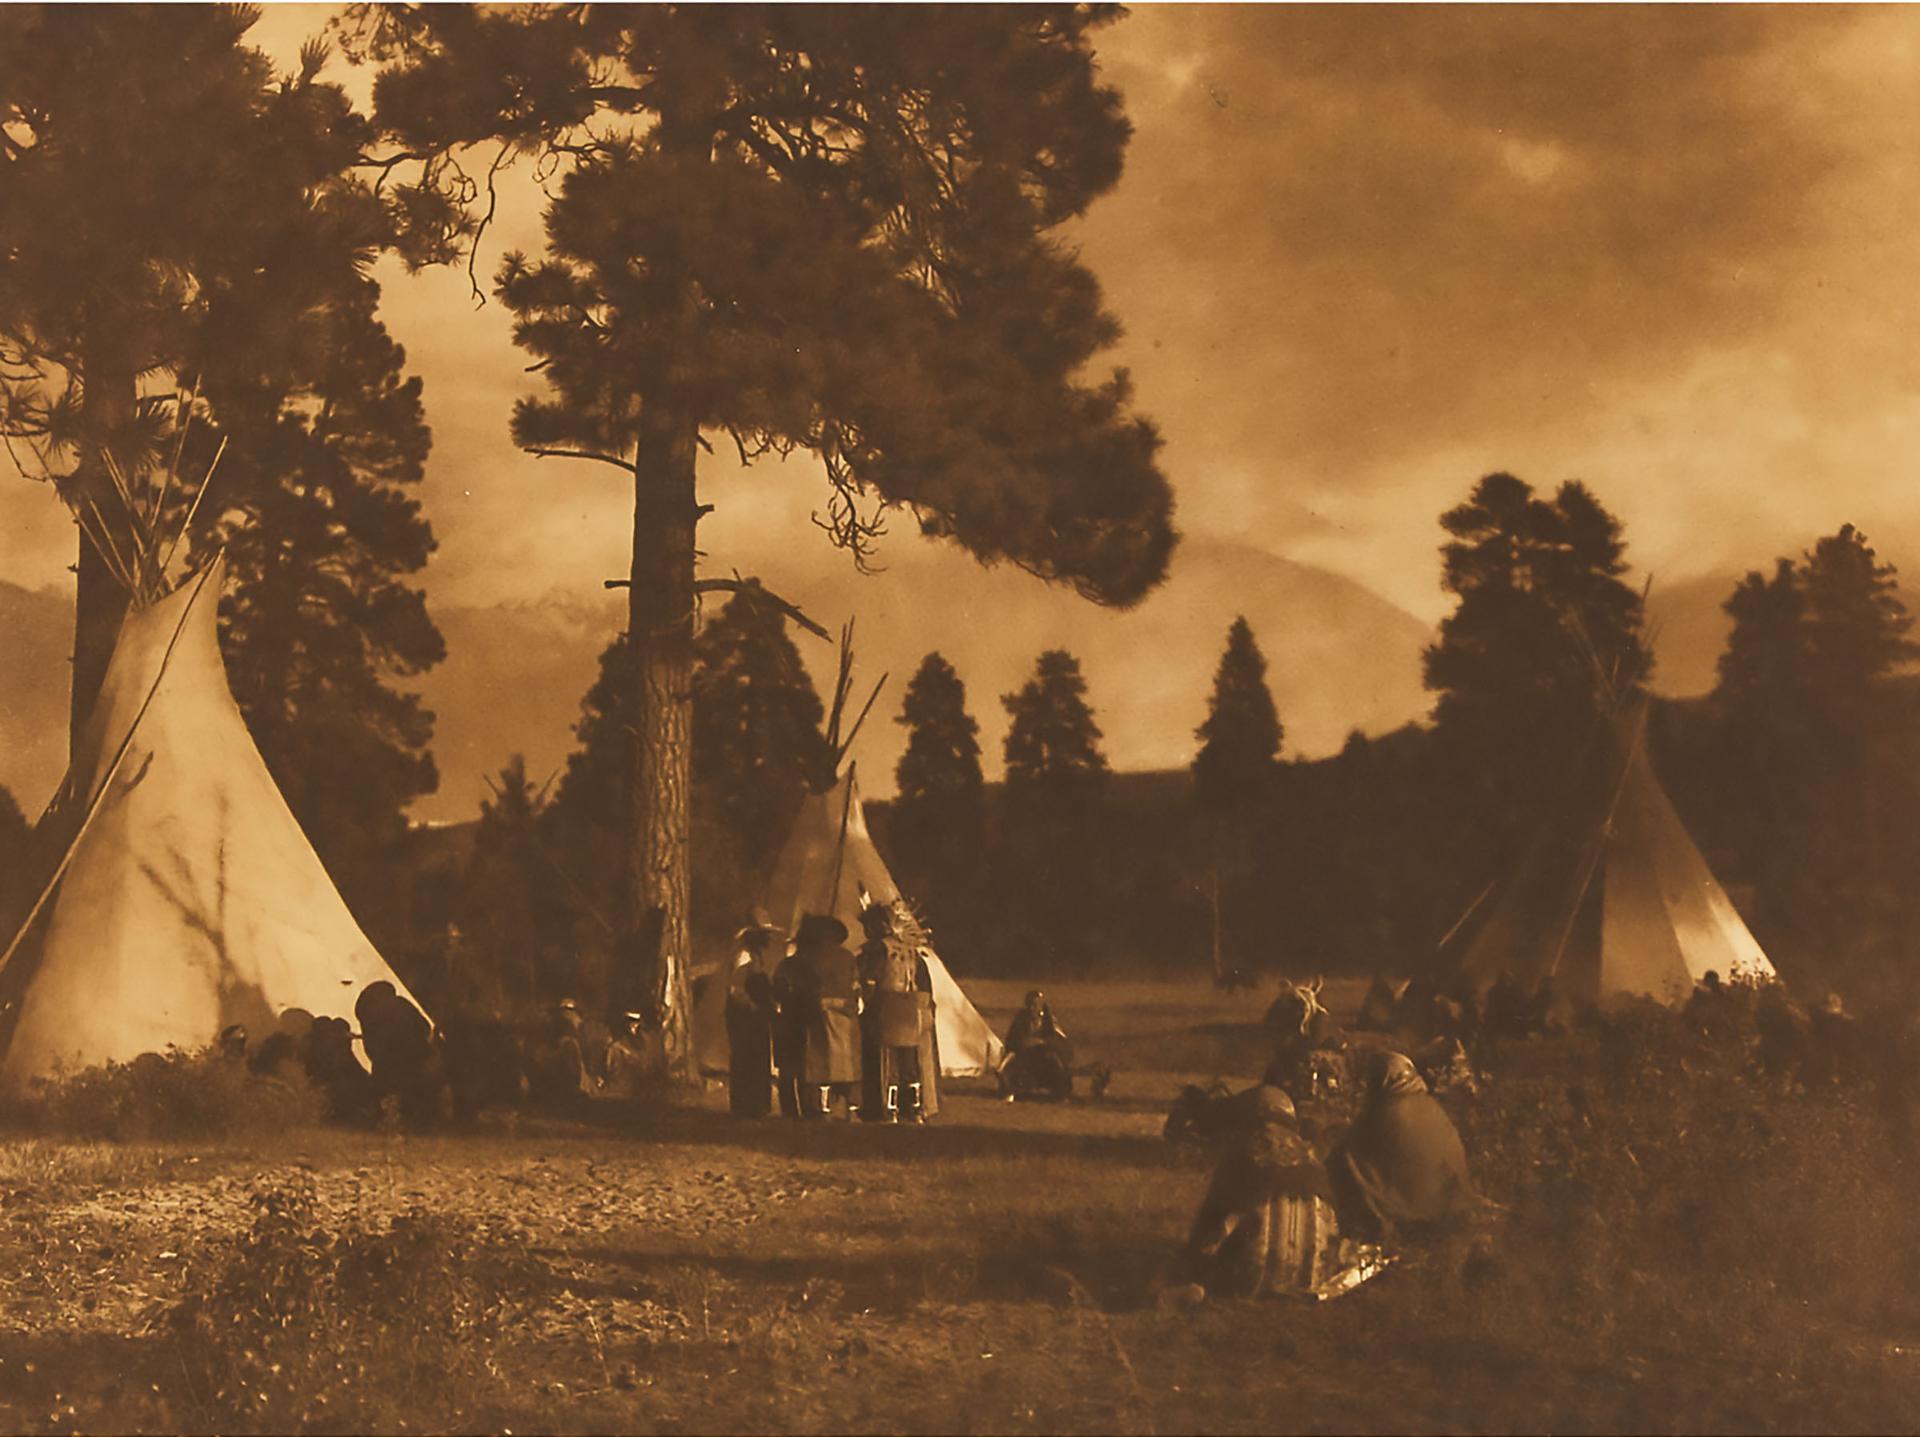 Edward Sherrif Curtis (1868-1952) - Flathead Camp On The Jocko River (From The North American Indian, Vol. 7, Plate 232), 1910